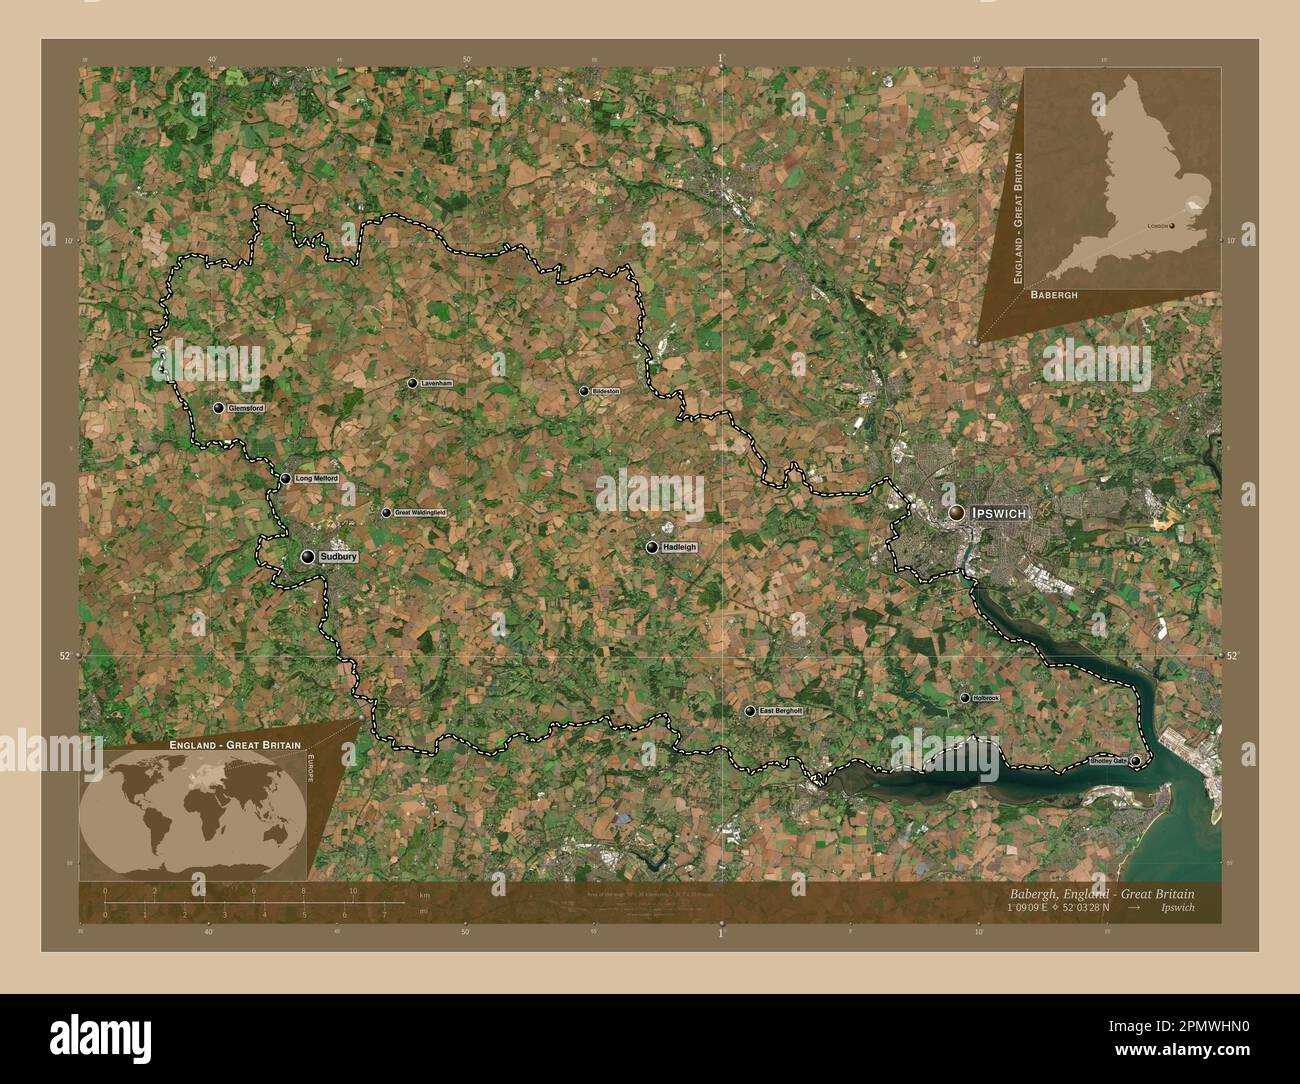 Babergh, non metropolitan district of England - Great Britain. Low resolution satellite map. Locations and names of major cities of the region. Corner Stock Photo